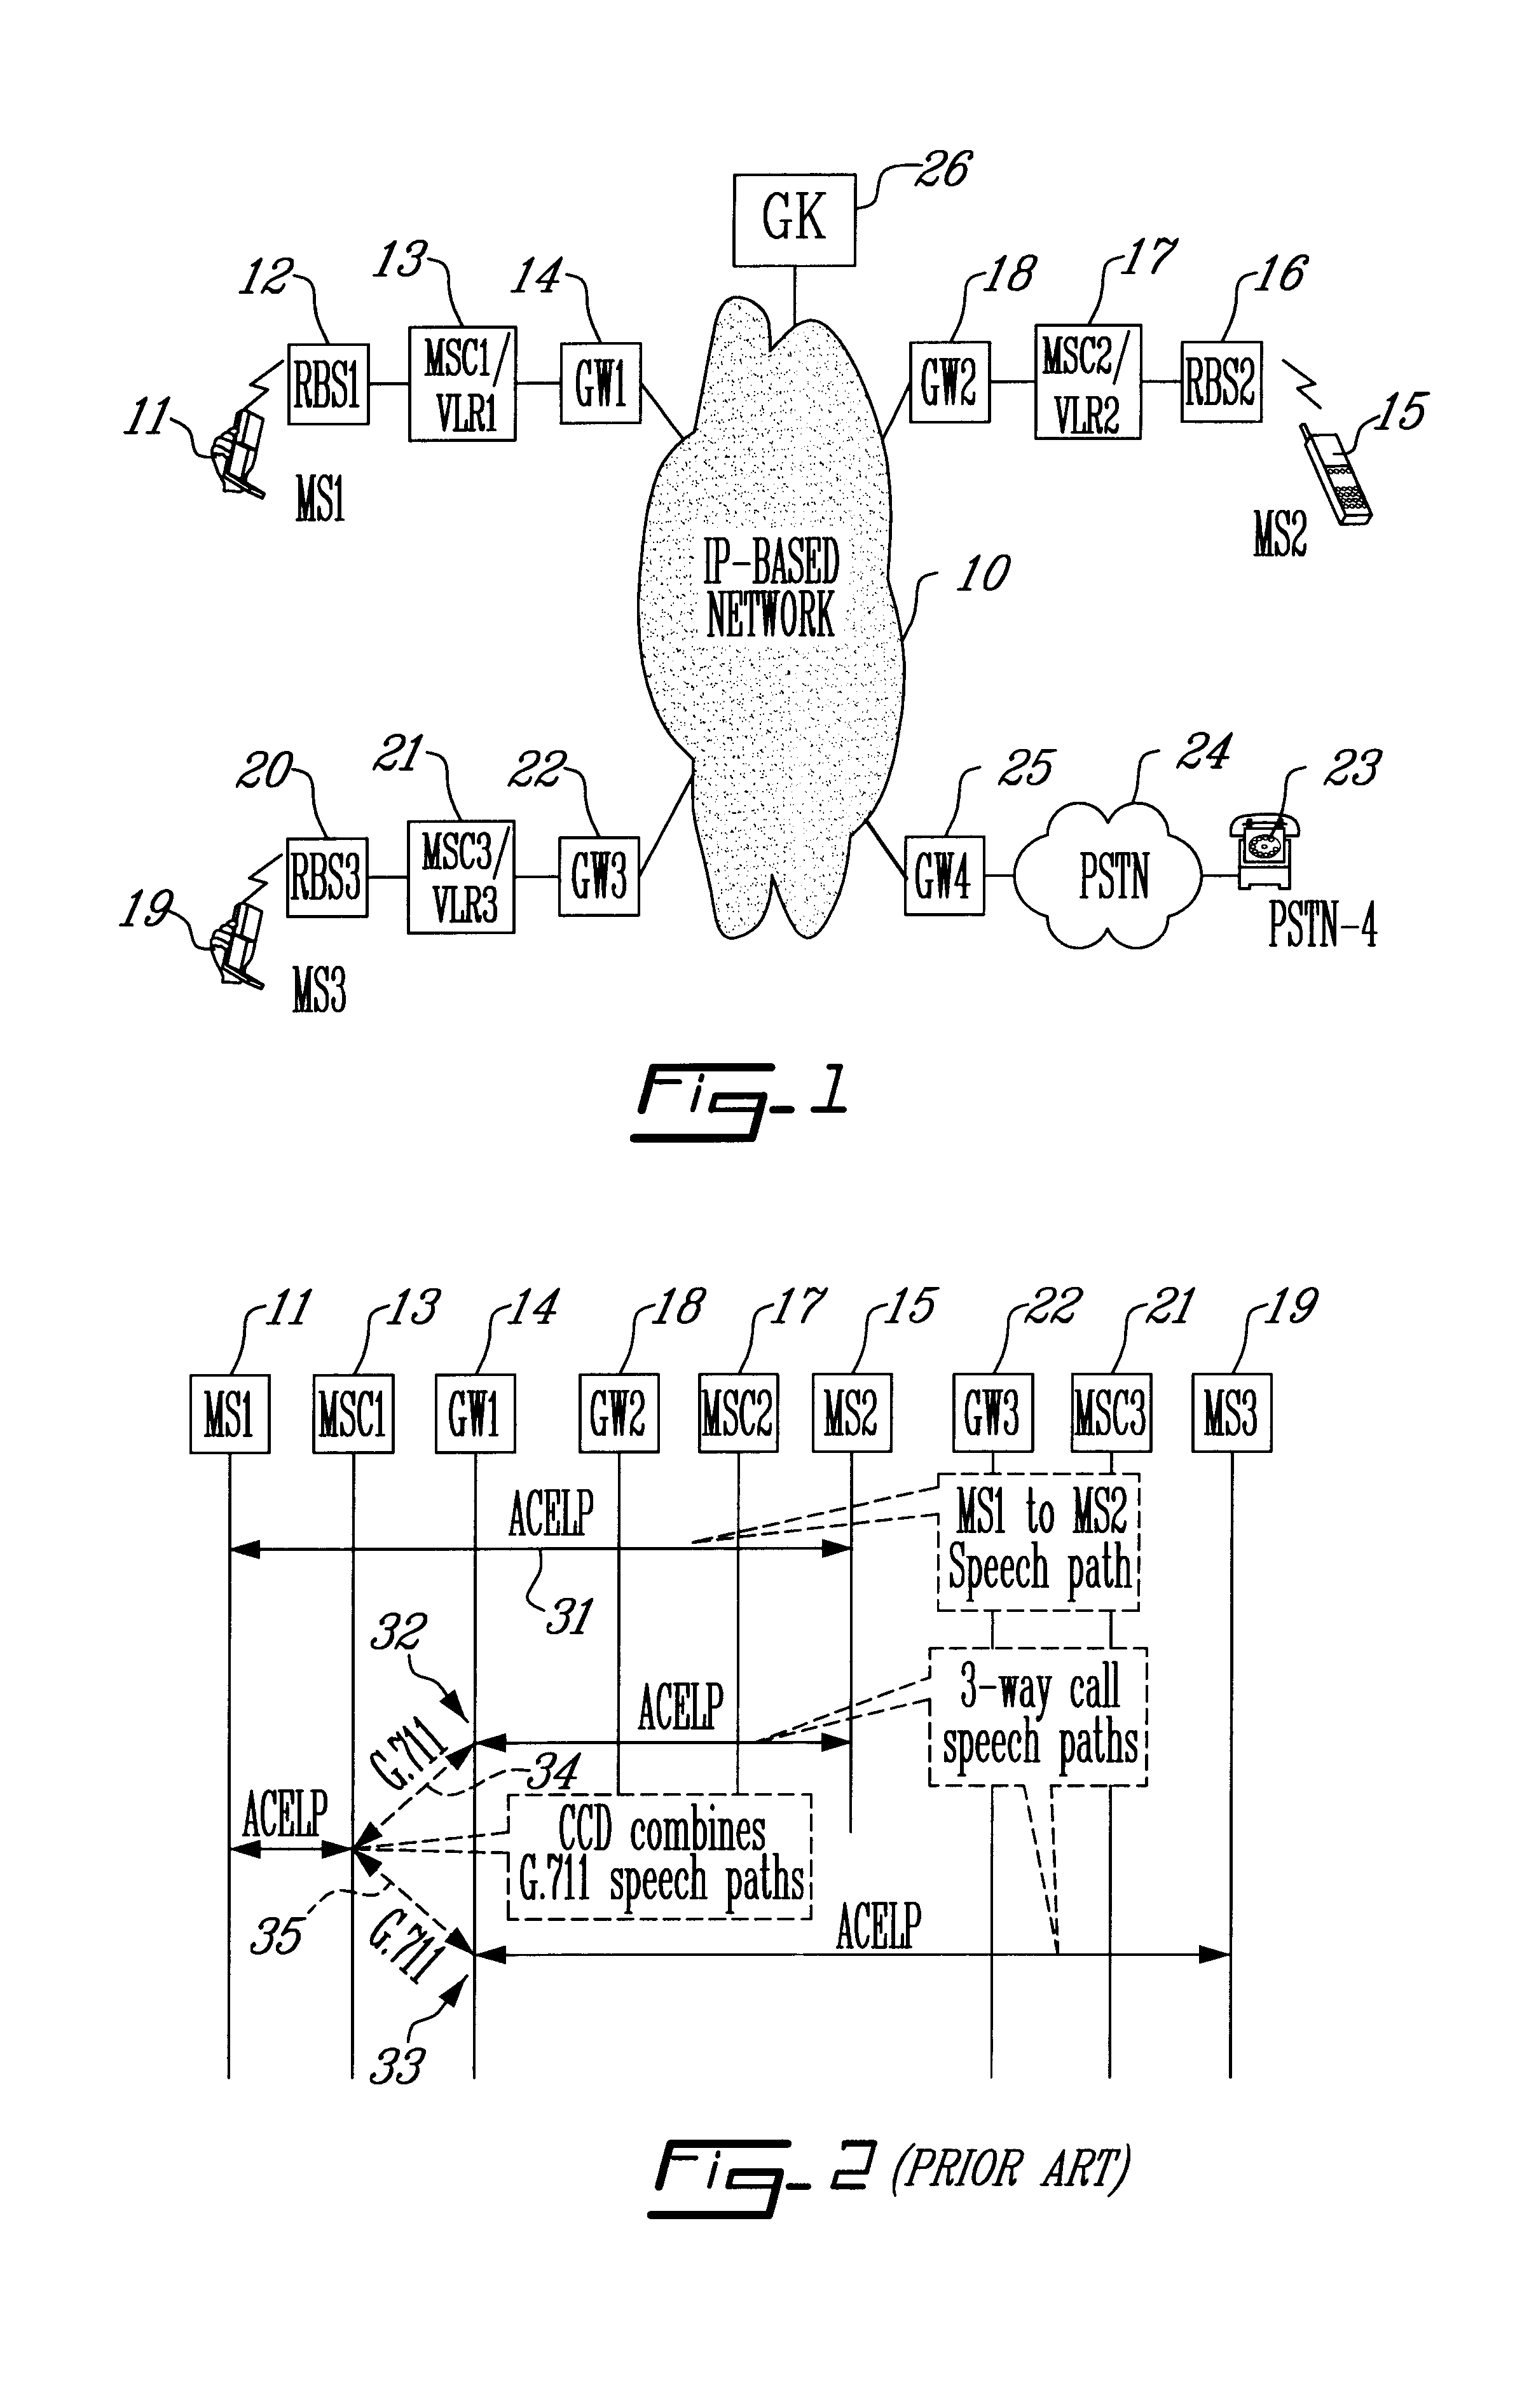 System and method of minimizing the number of voice transcodings during a conference call in a packet-switched network